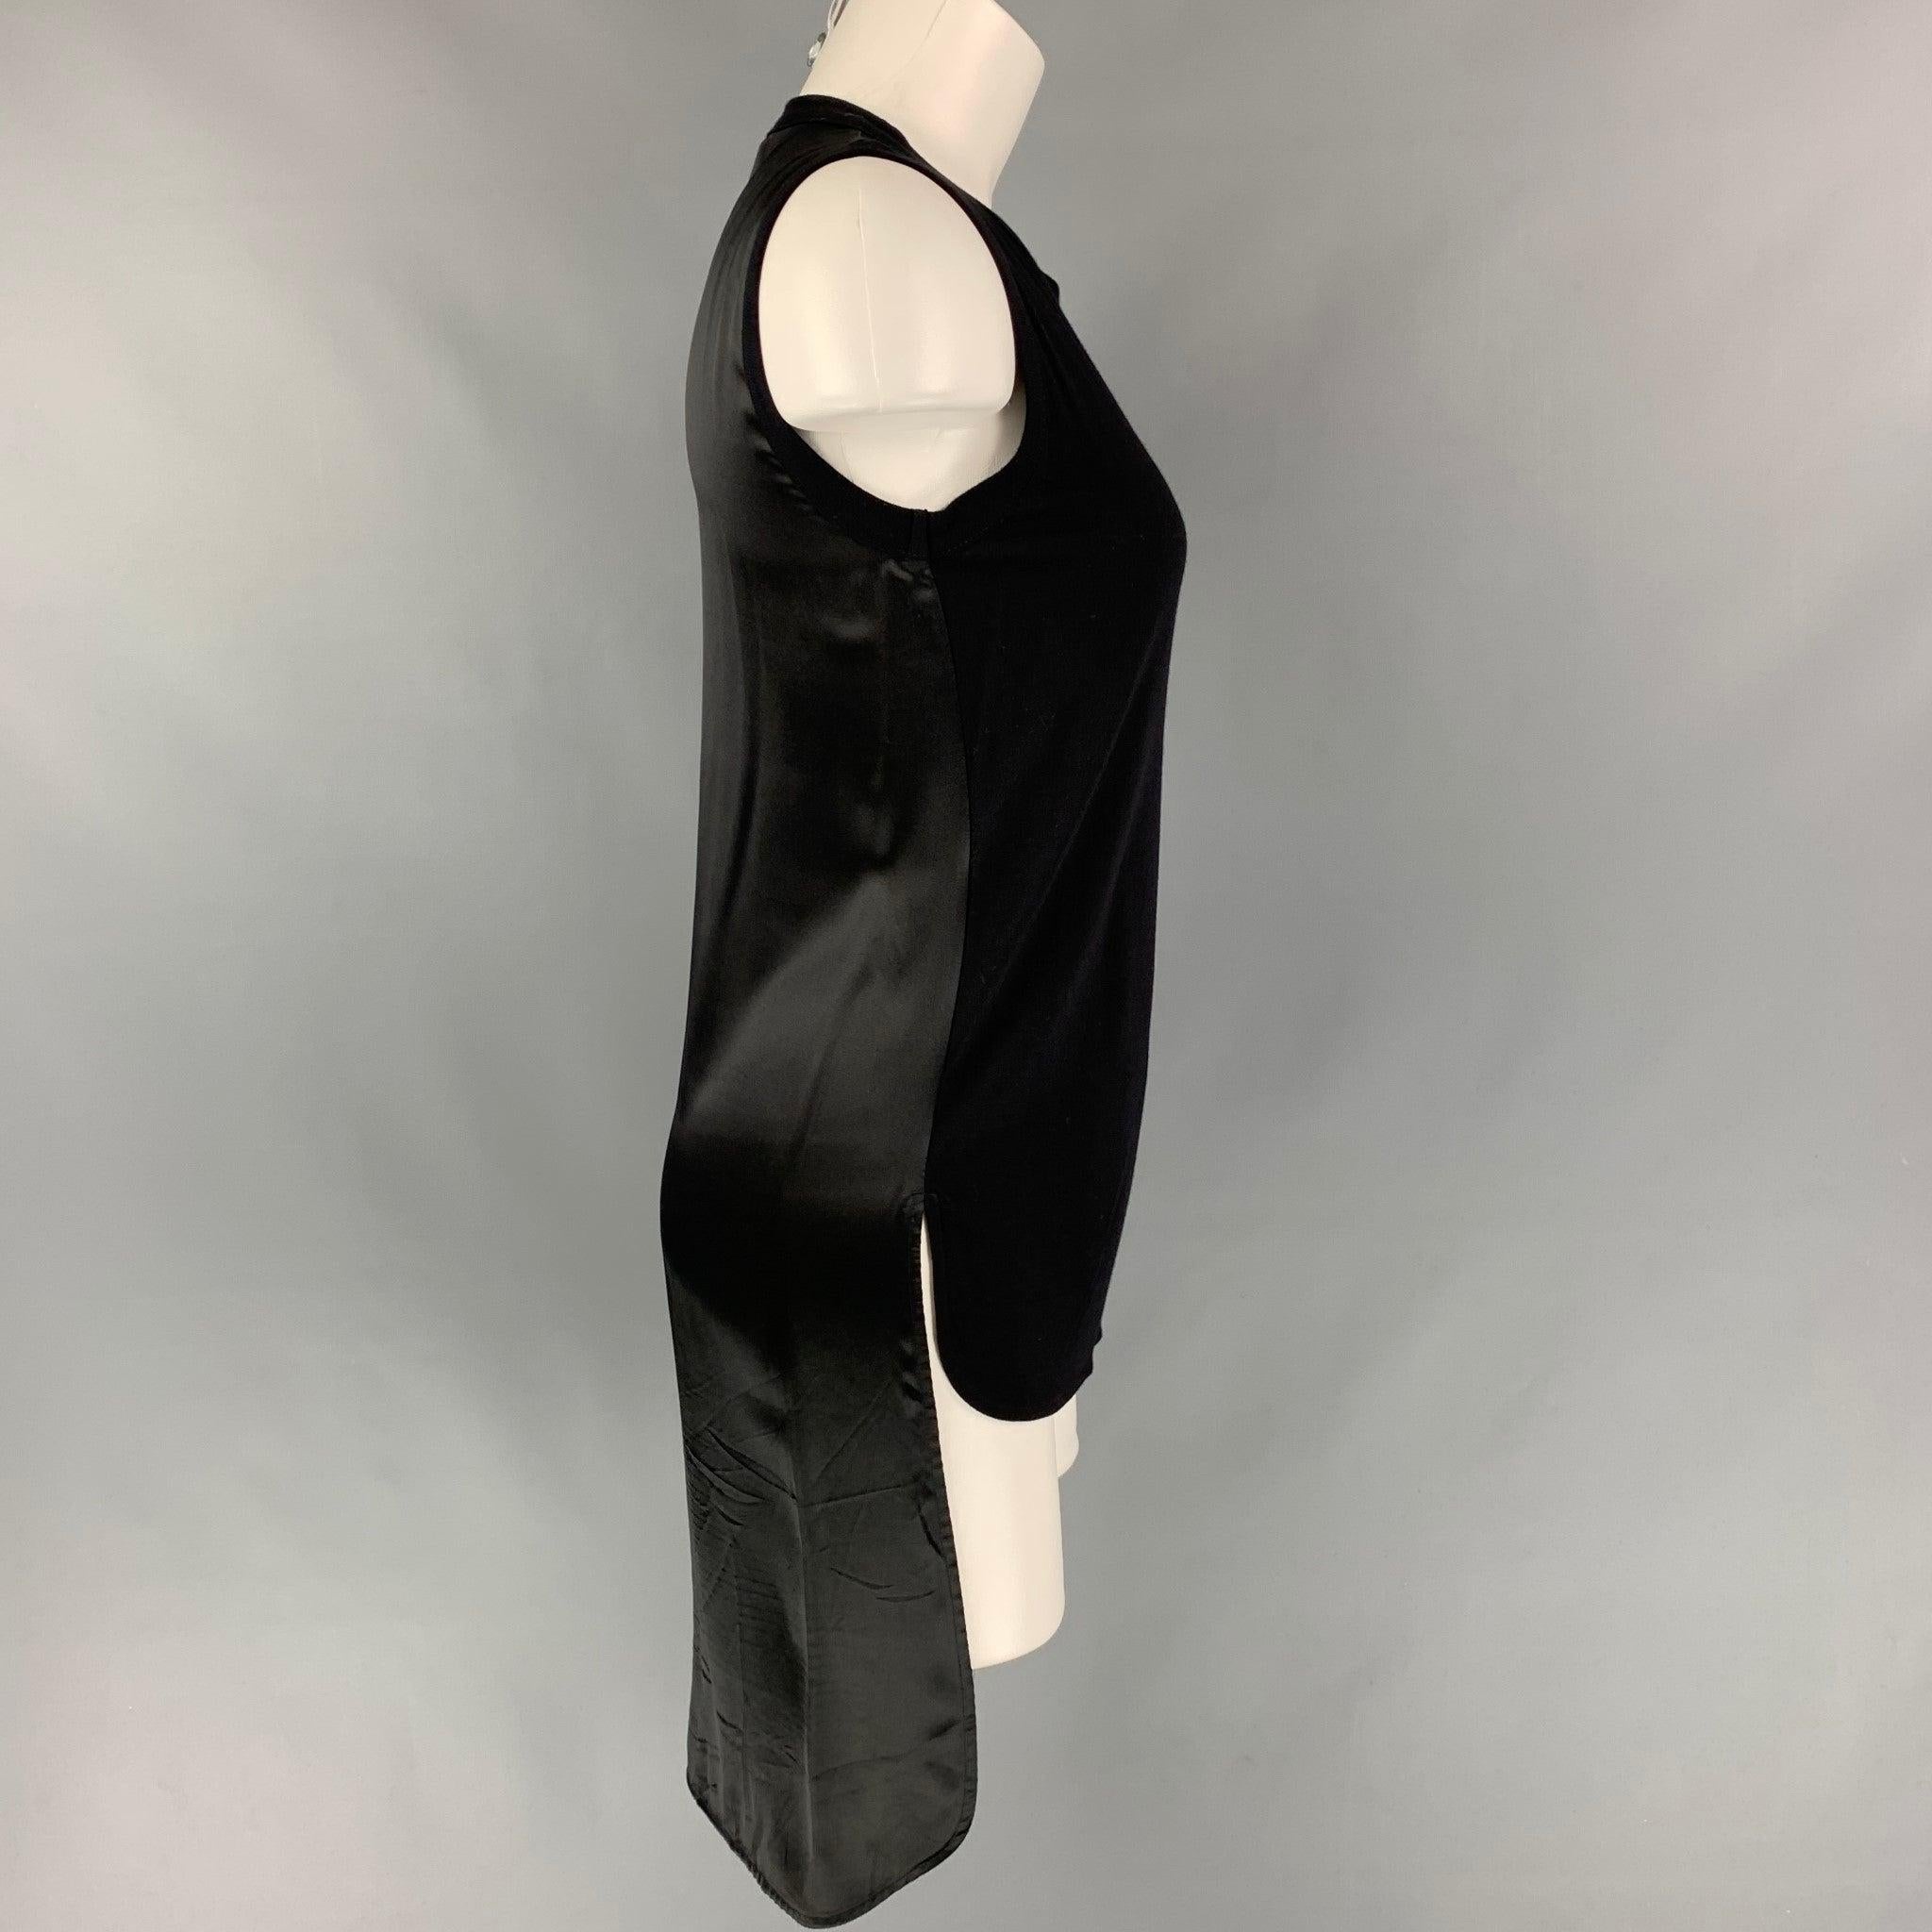 GIAMBATTISTA VALLI dress top comes in a black viscose / silk featuring a sleeveless style, long back, and a crew-neck. Made in Italy.
Very Good
Pre-Owned Condition. 

Marked:   38/XXS 

Measurements: 
 
Shoulder: 13 inches  Bust: 34 inches  Length: